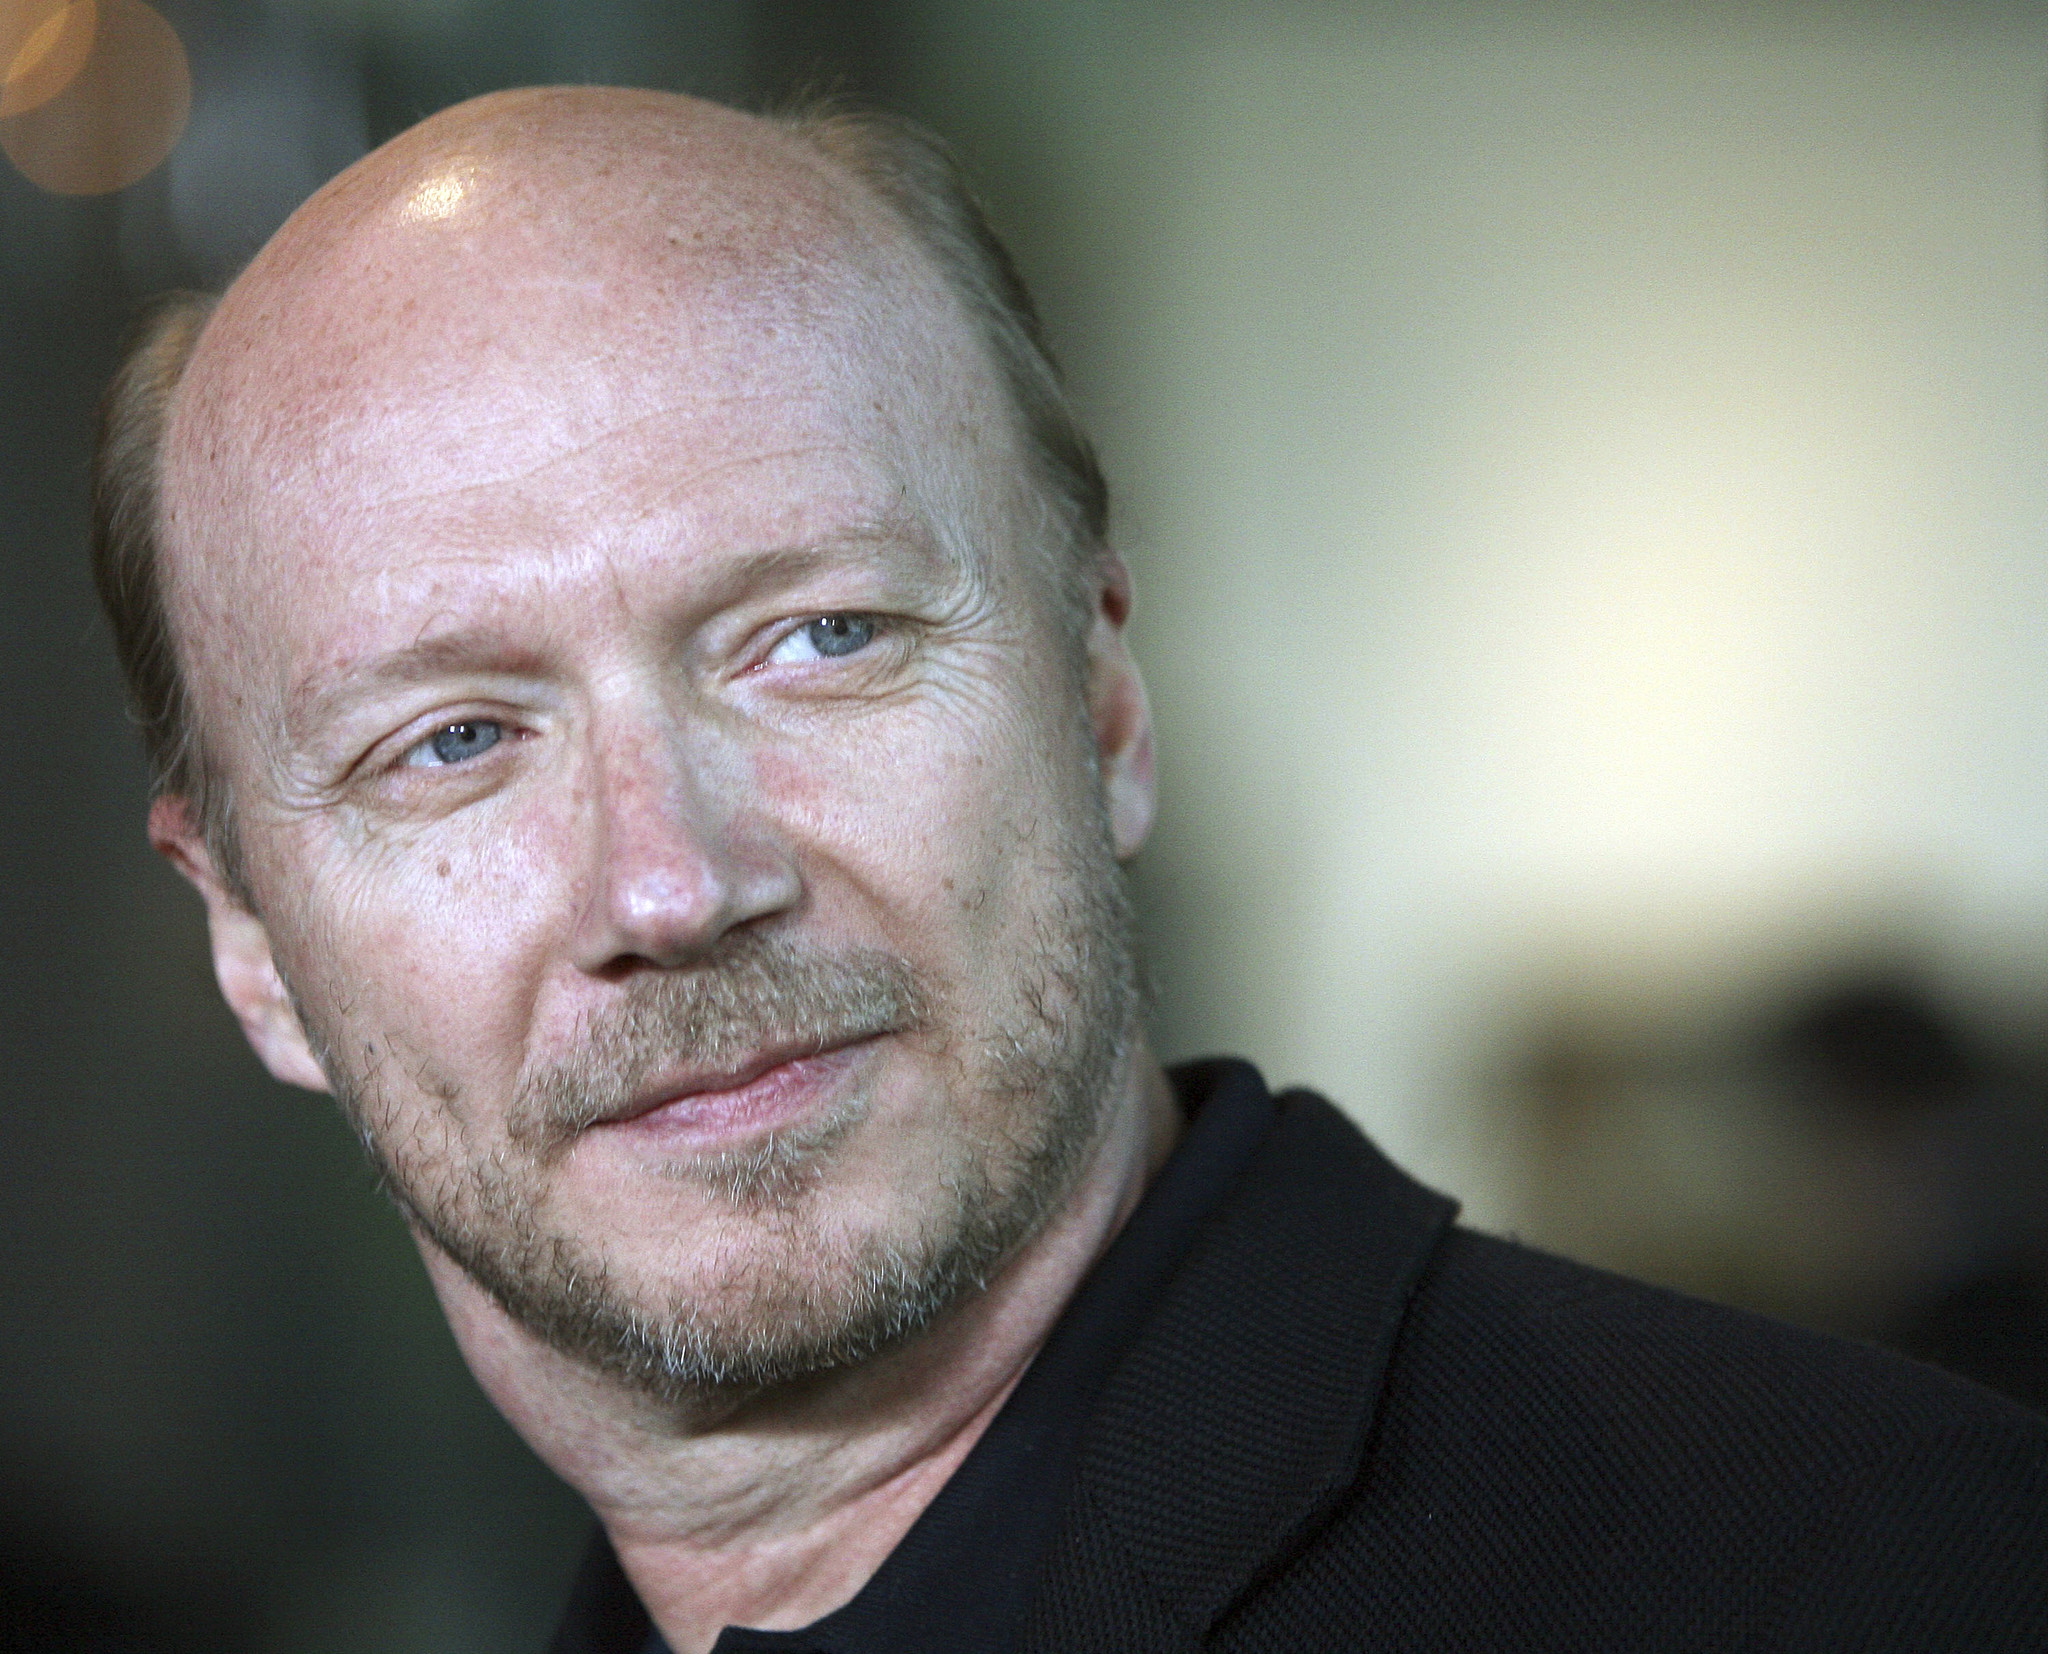 4 women accuse filmmaker Paul Haggis of sexual misconduct, including two rapes ...